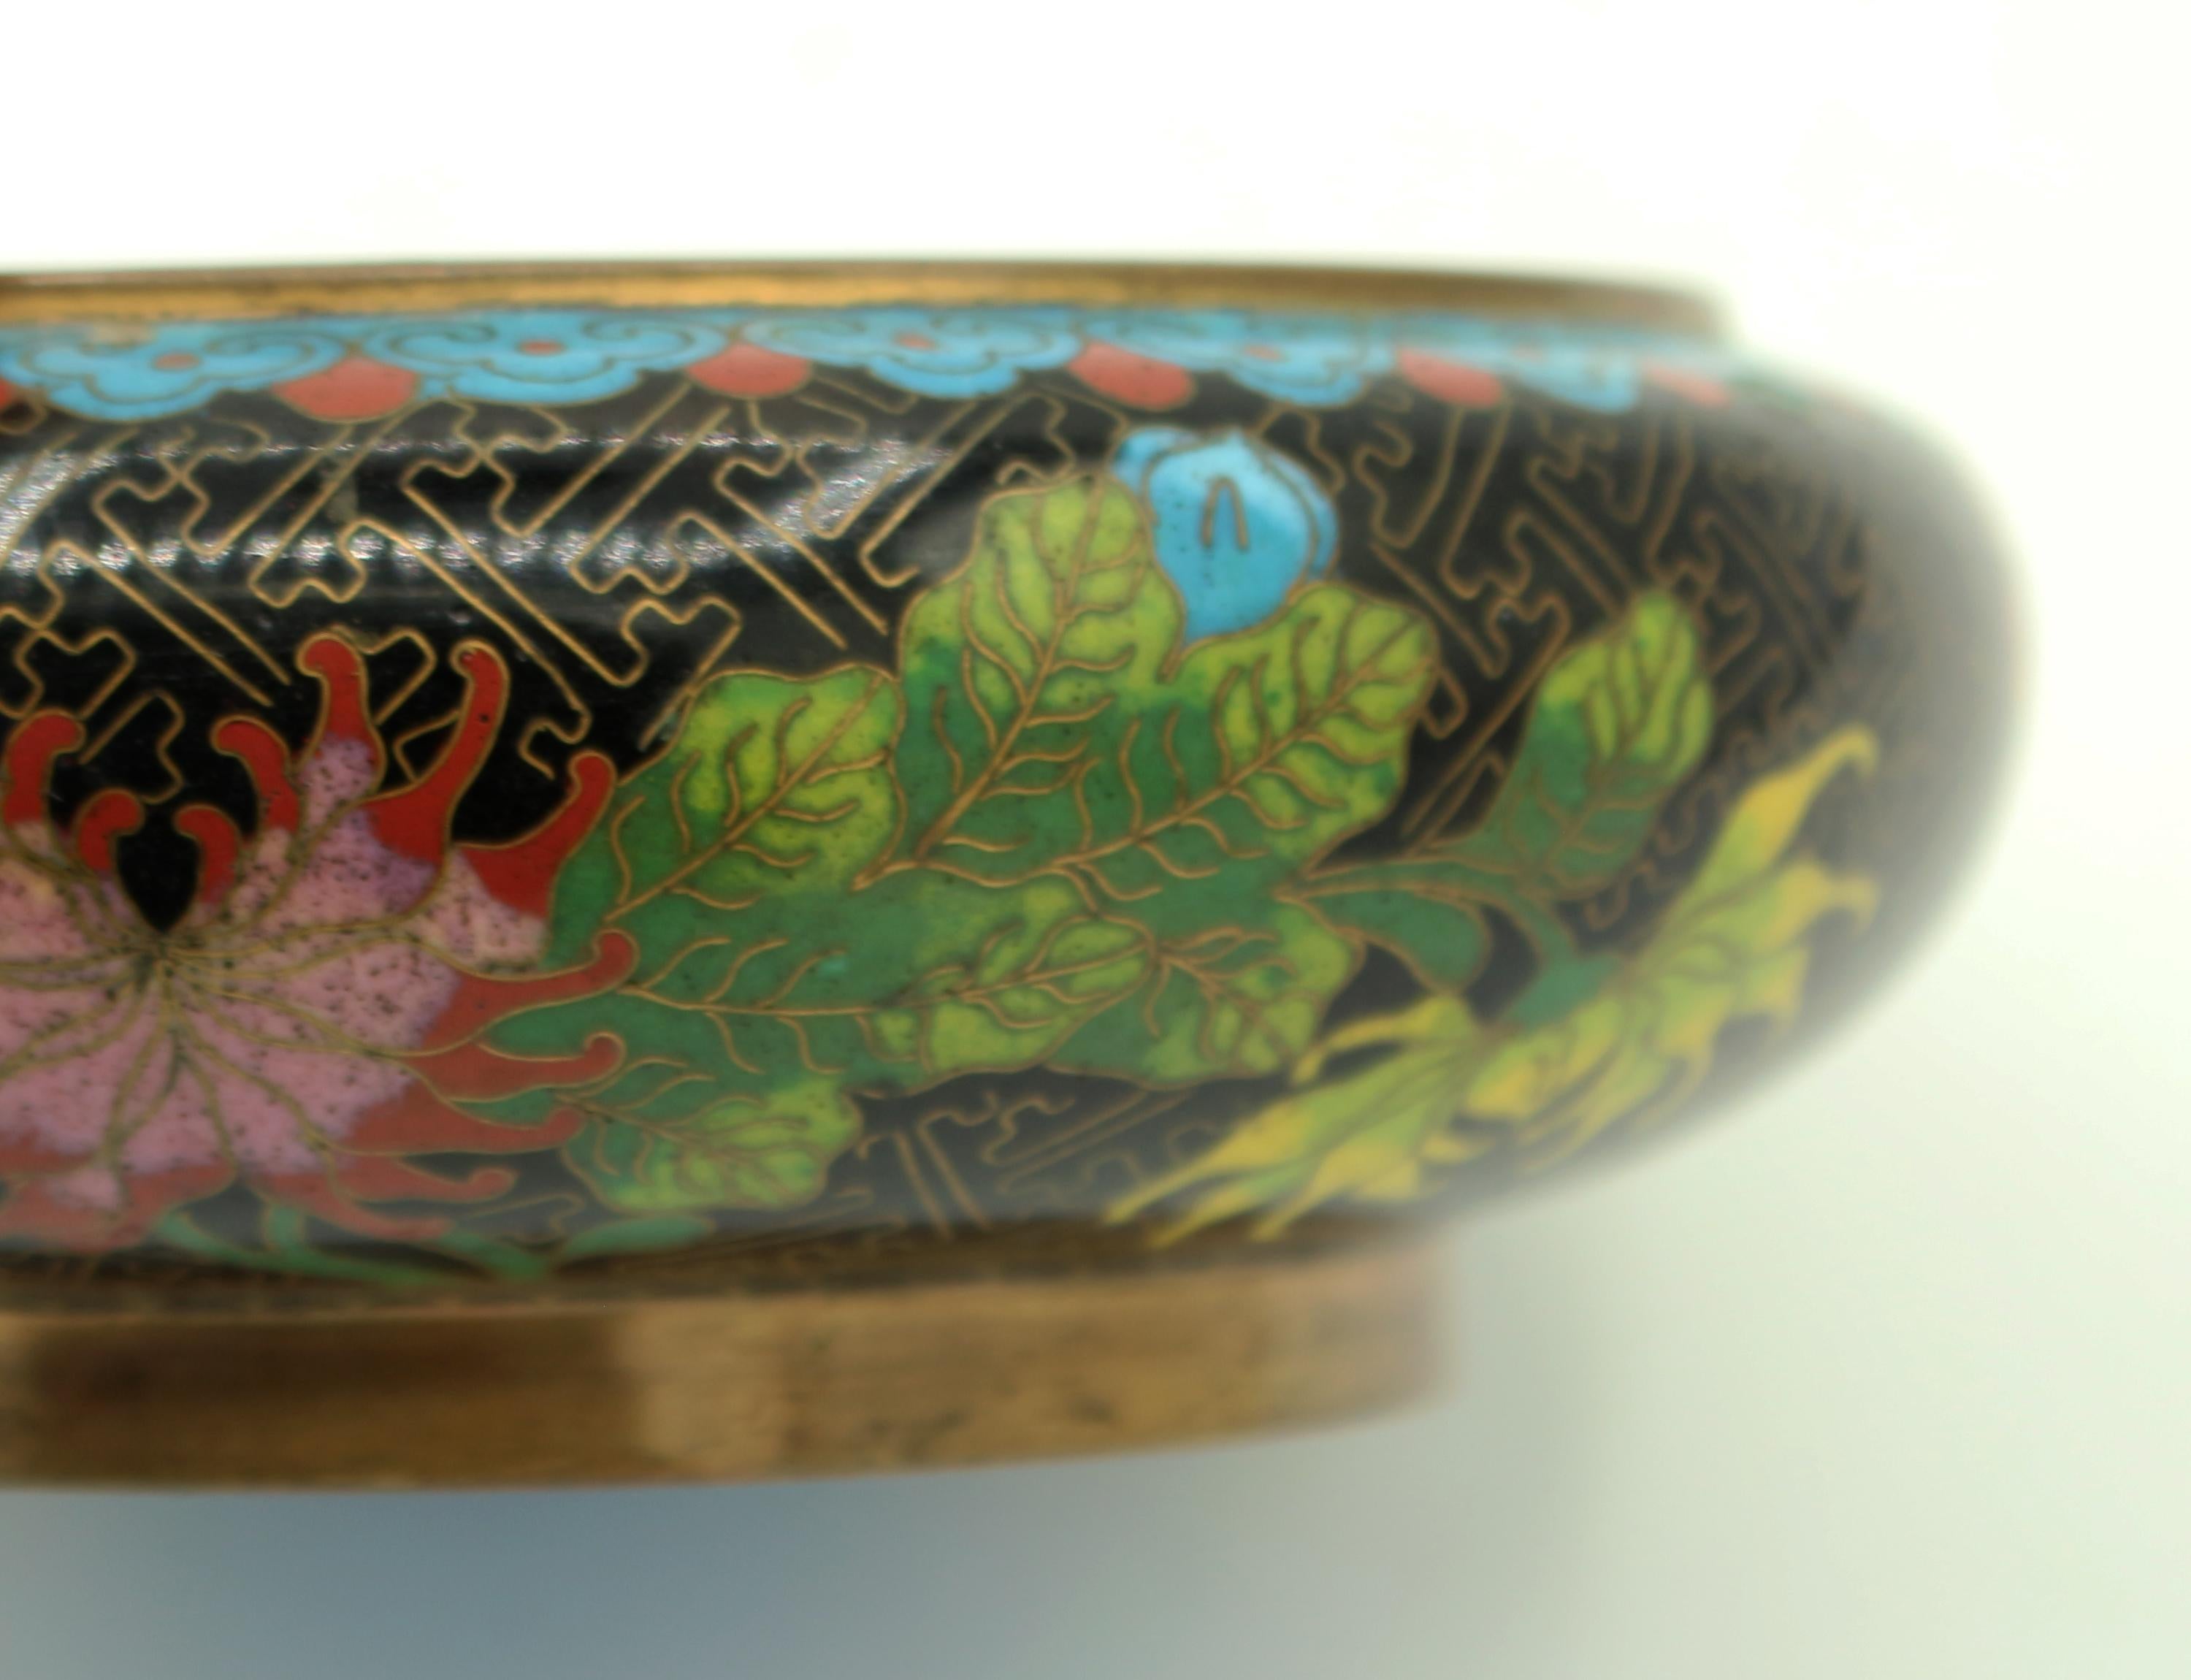 Circa 1900 Qing Dynasty Cloisonne Bowl In Good Condition For Sale In Chapel Hill, NC